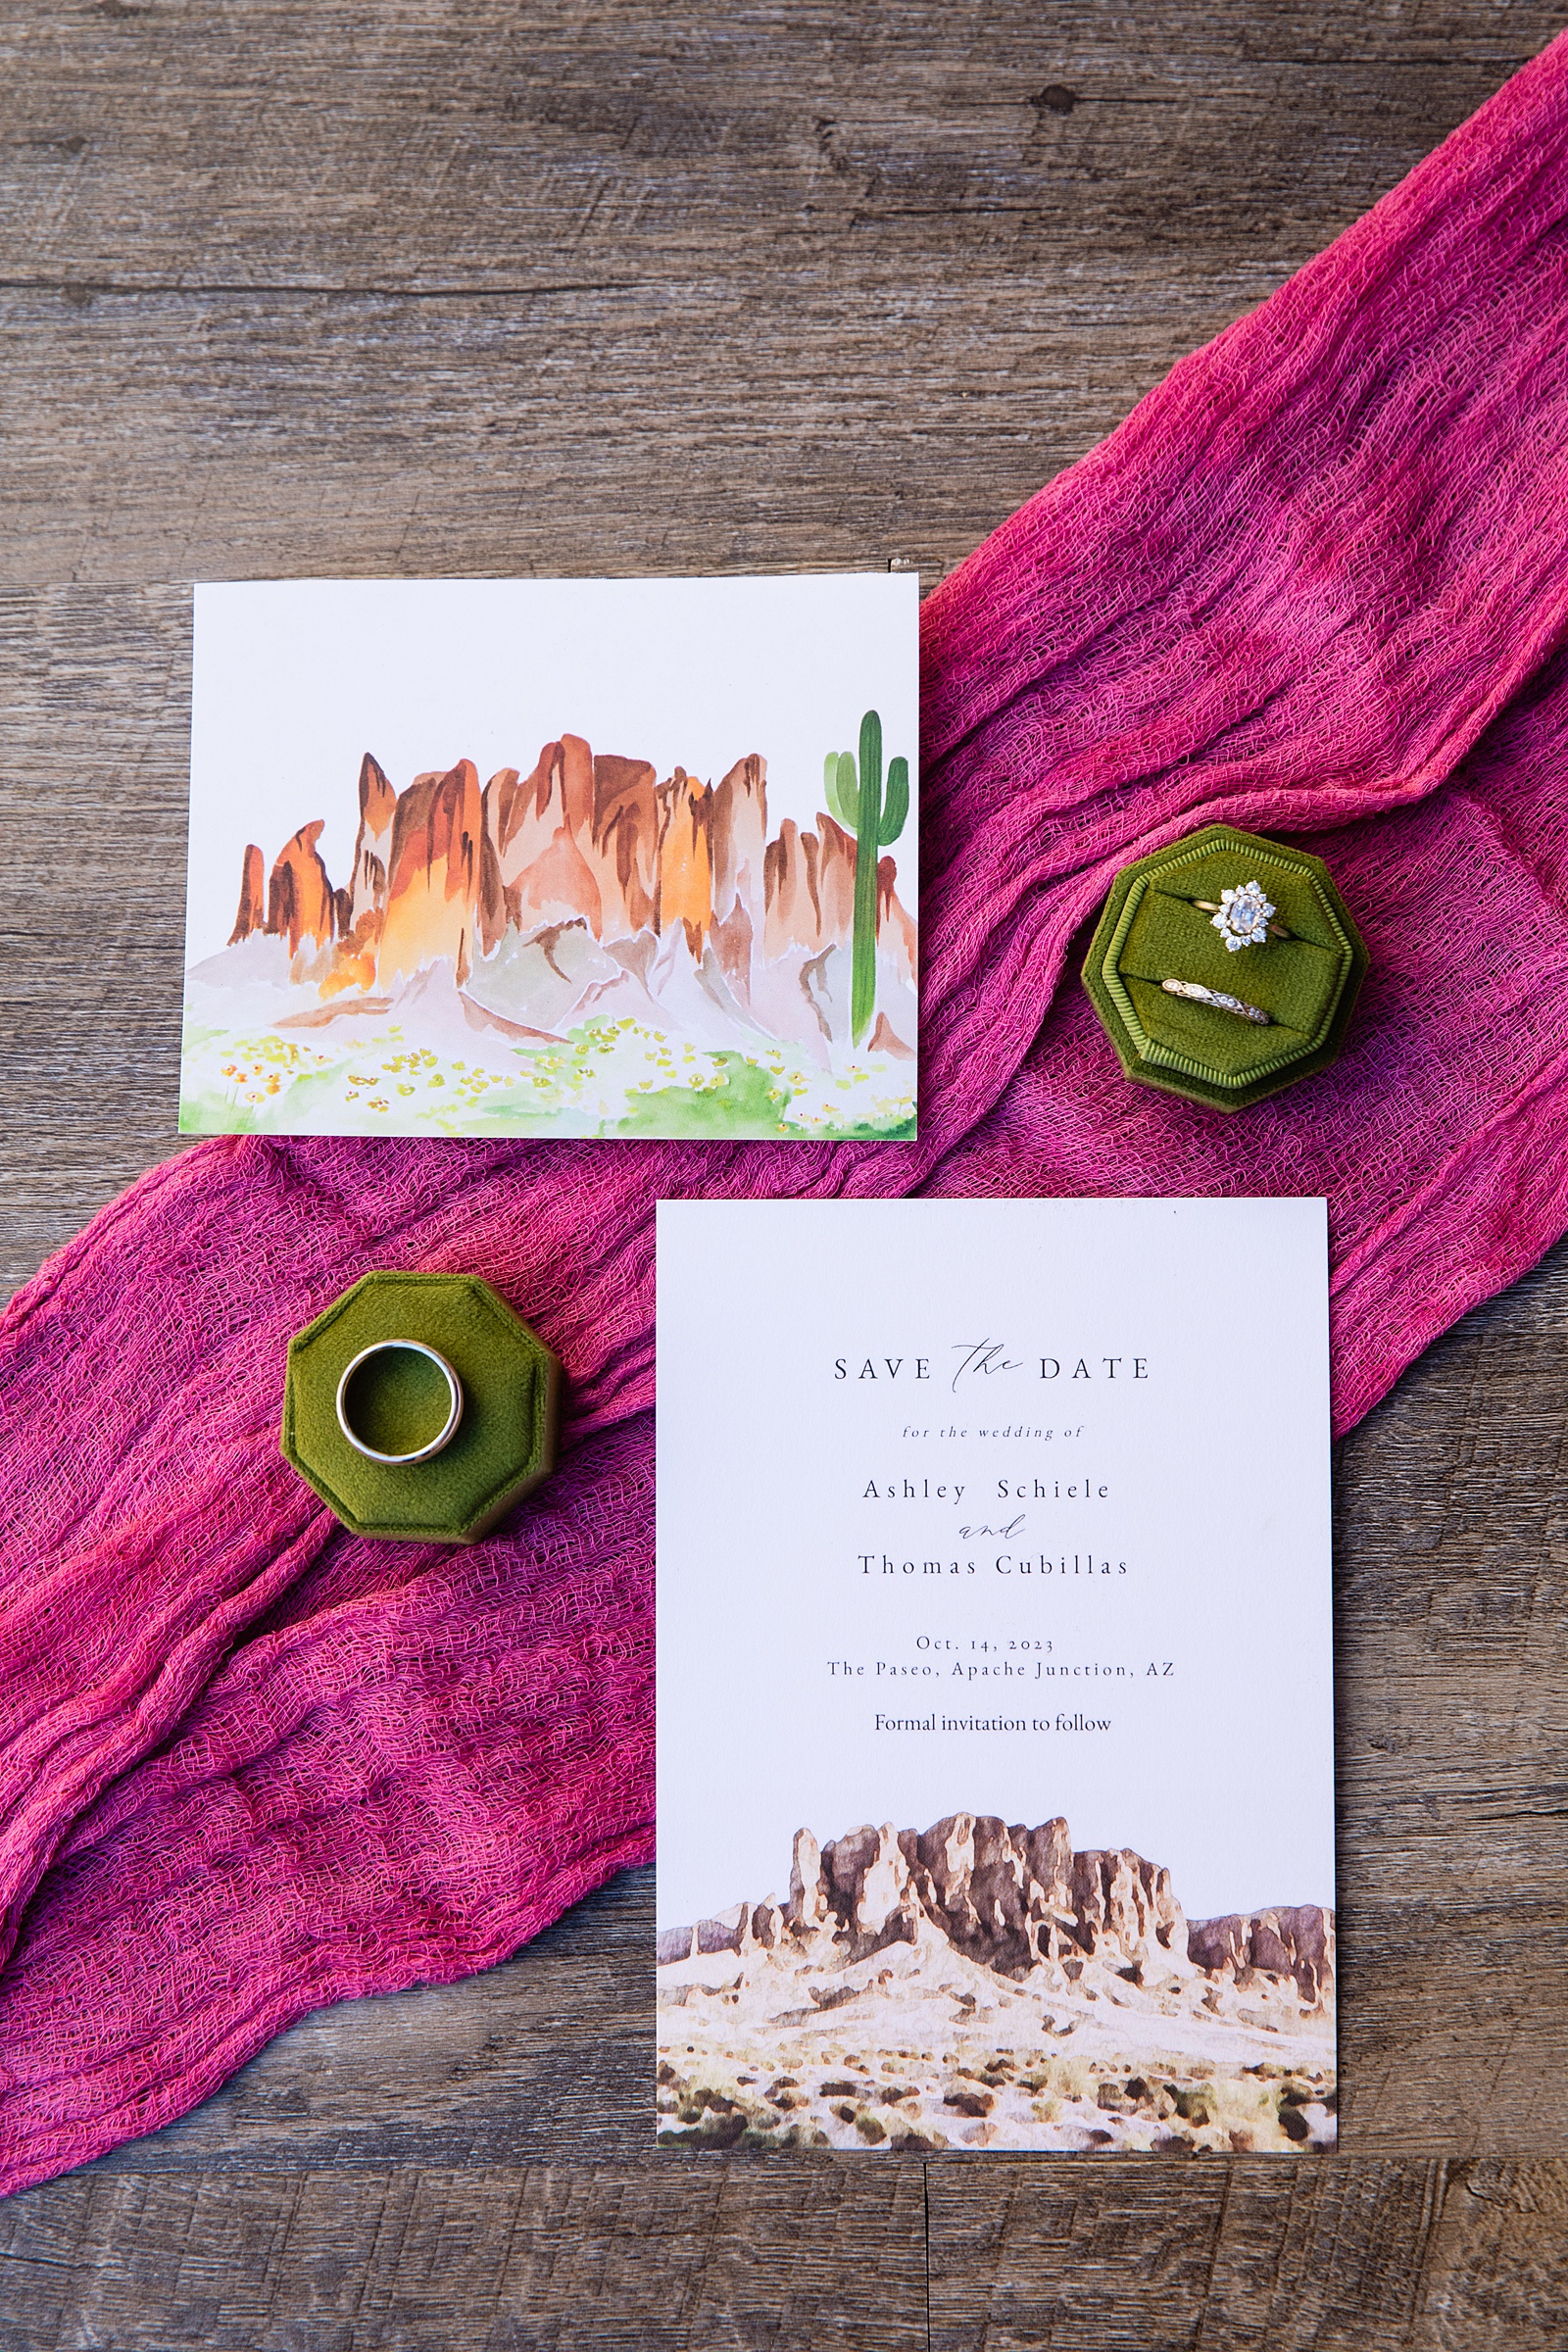 Bride and groom's wedding day details of invitation and wedding bands by Juniper and Co Photography.